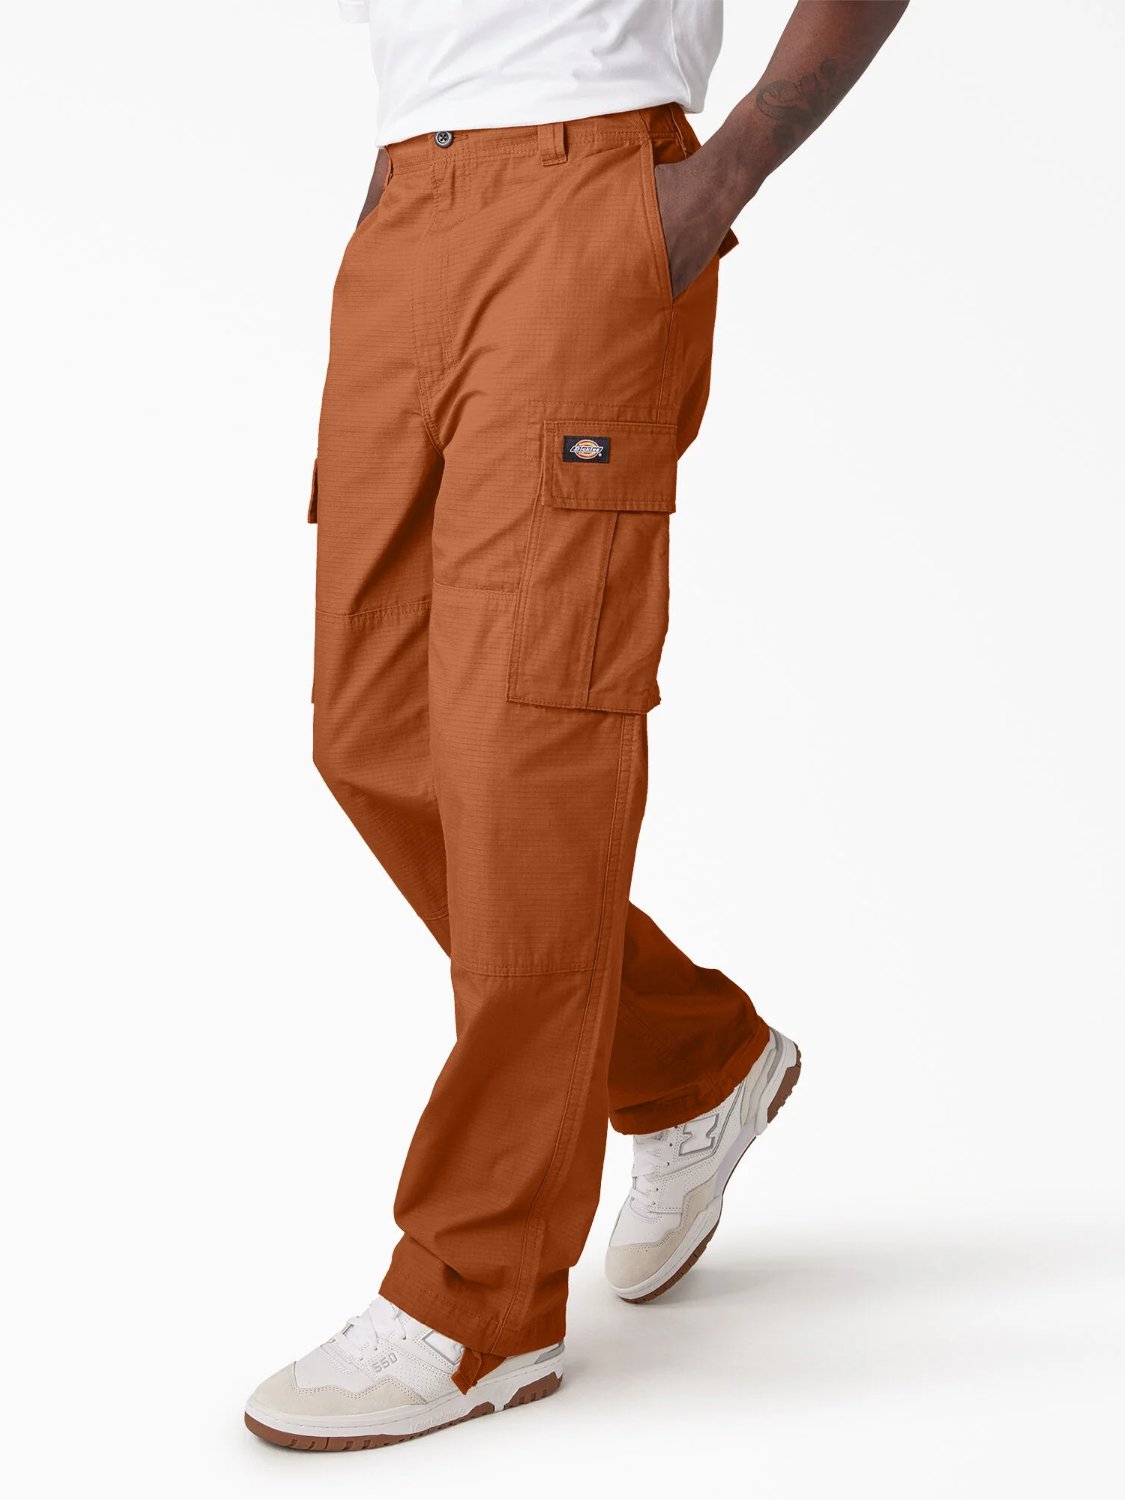 Eagle Bend Cargo Trousers in Khaki, Trousers